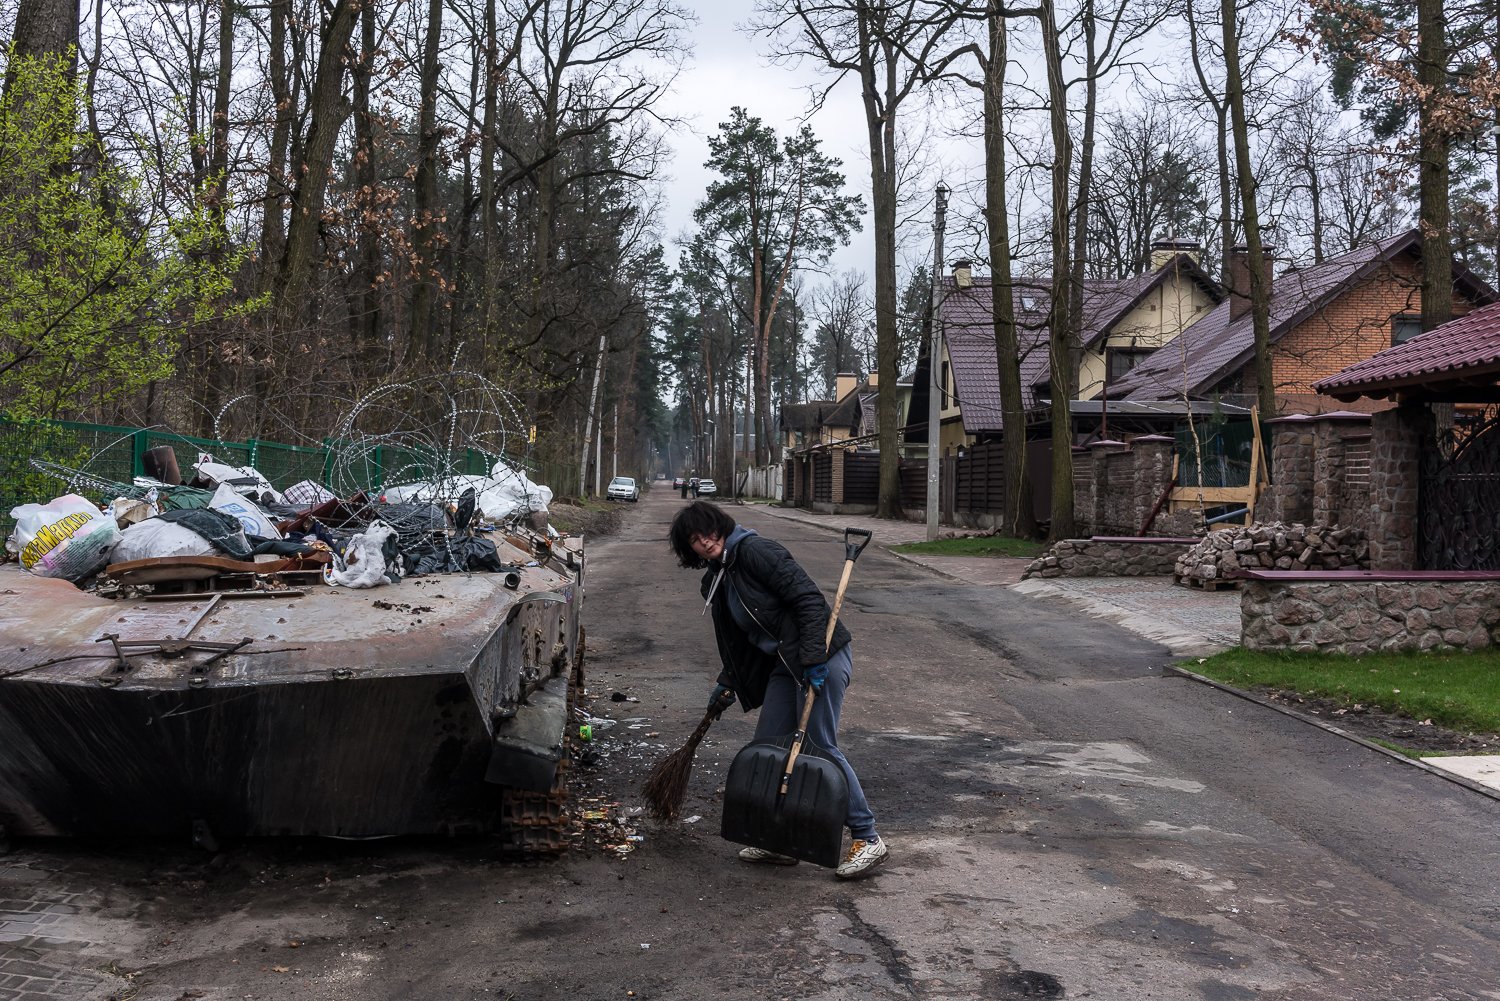  A woman who gave her name only as Nadiya sweeps up around a destroyed Russian armored personnel carrier that has been converted into a dumpster on Thursday, April 21, 2022 in Irpin, Ukraine. 